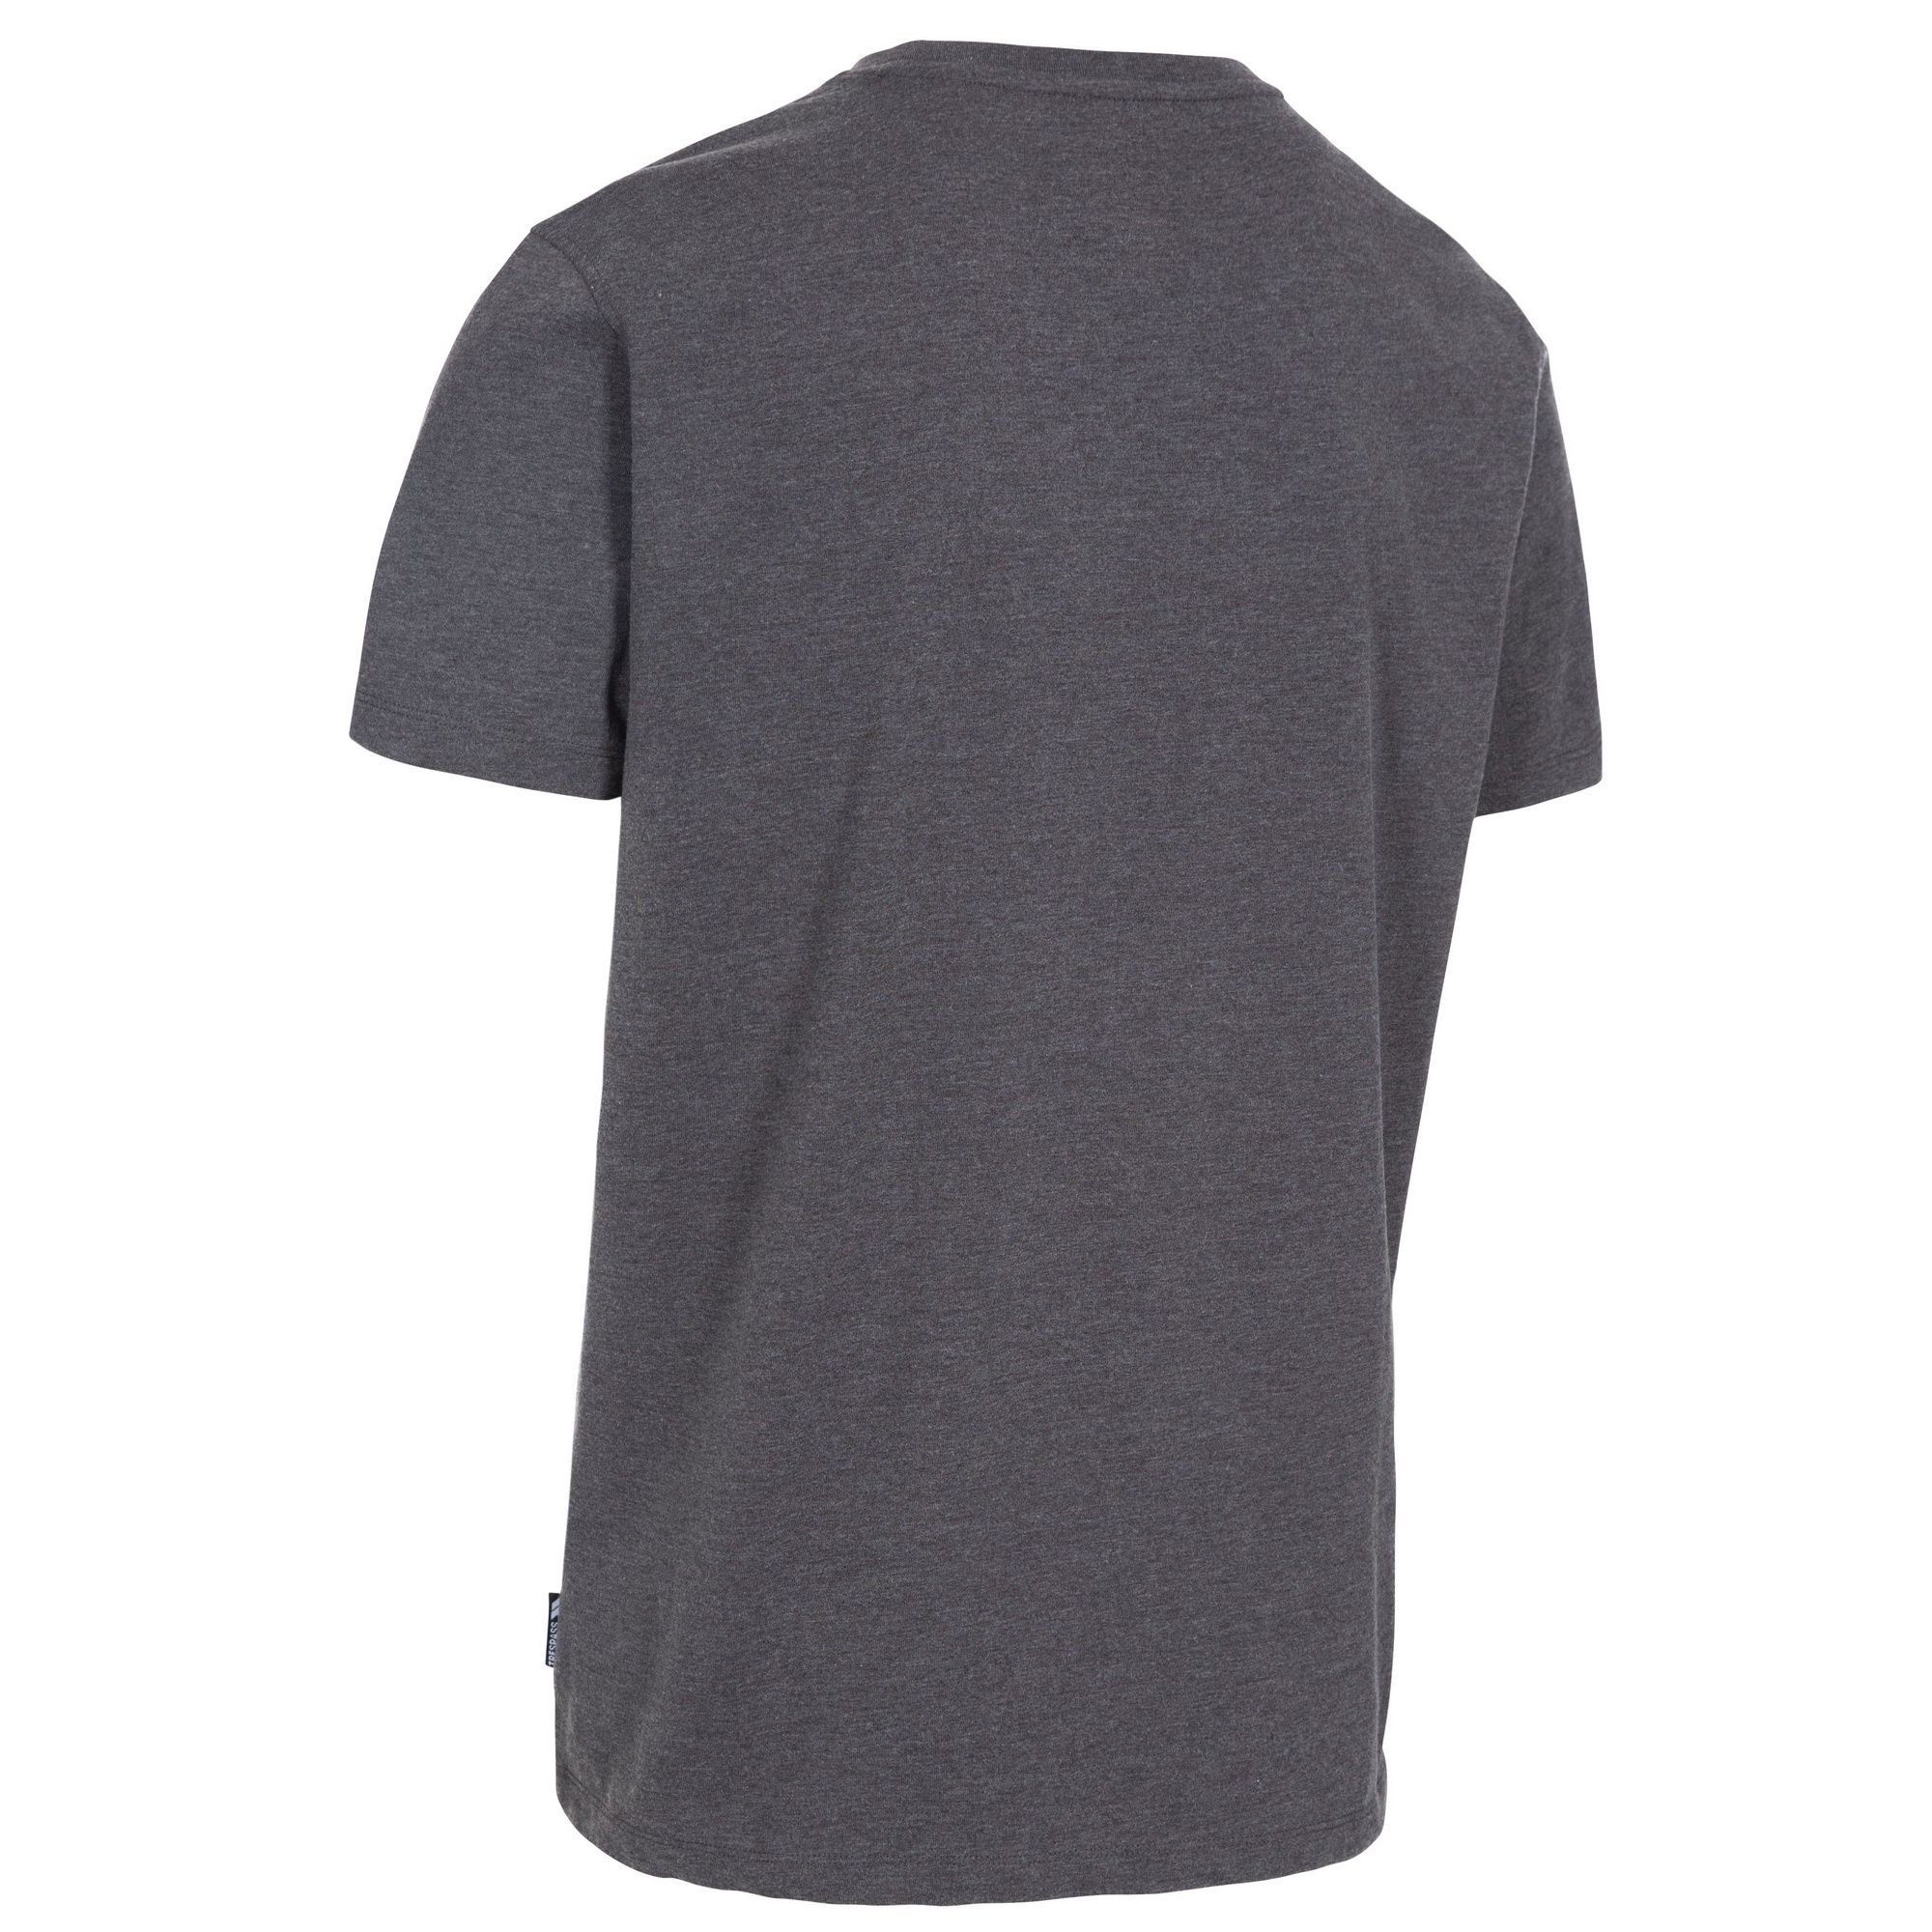 60% Cotton, 40% Polyester. 180gsm. Short sleeves. Round neck. Print on chest. Wicking. Quick dry. Trespass Mens Chest Sizing (approx): S - 35-37in/89-94cm, M - 38-40in/96.5-101.5cm, L - 41-43in/104-109cm, XL - 44-46in/111.5-117cm, XXL - 46-48in/117-122cm, 3XL - 48-50in/122-127cm.